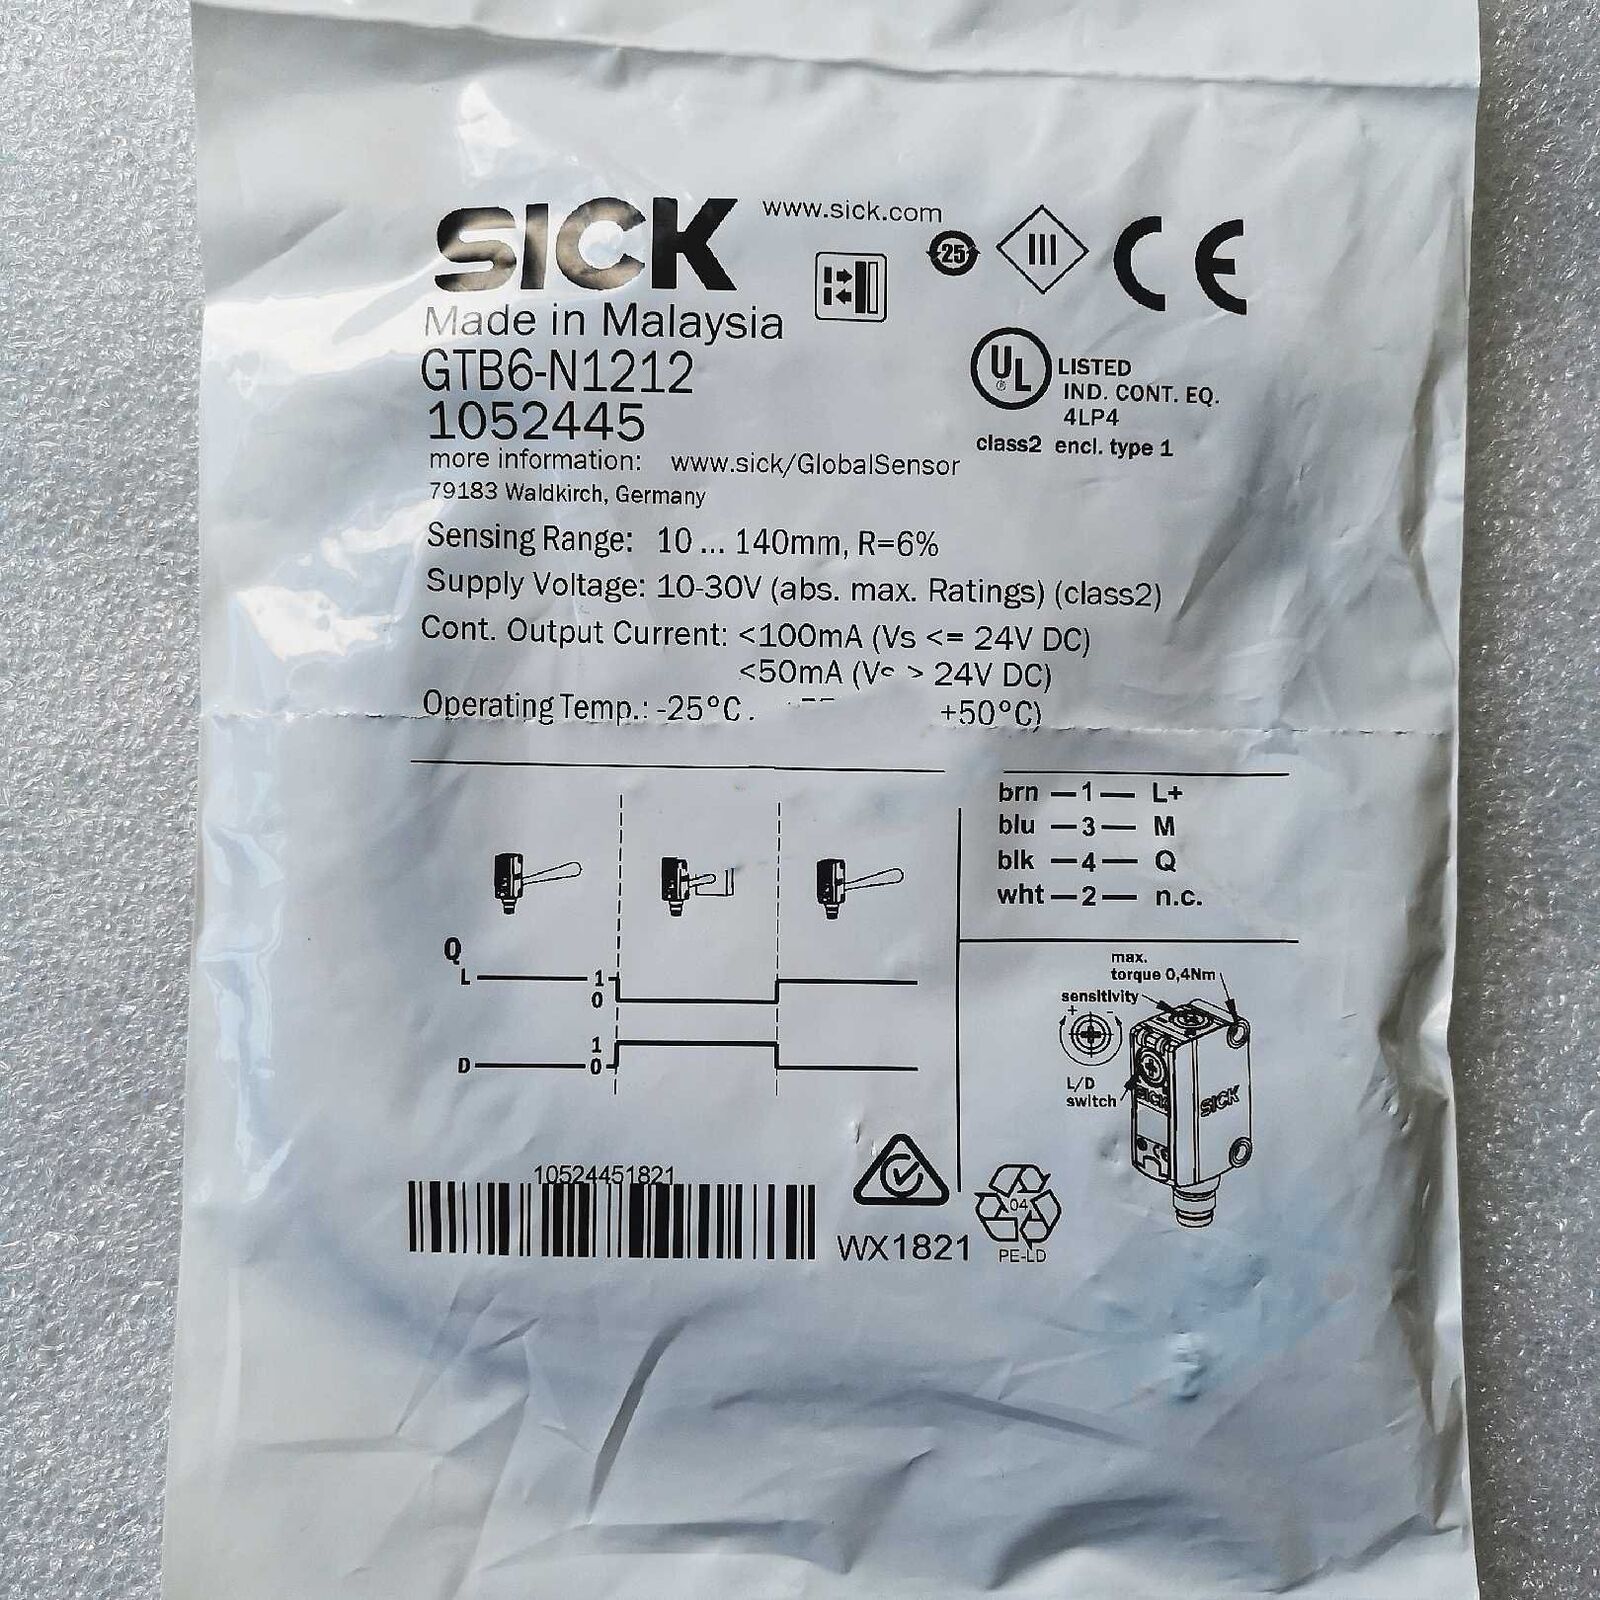 new 1PC  FOR SICK photoelectric switch GTB6-N1212